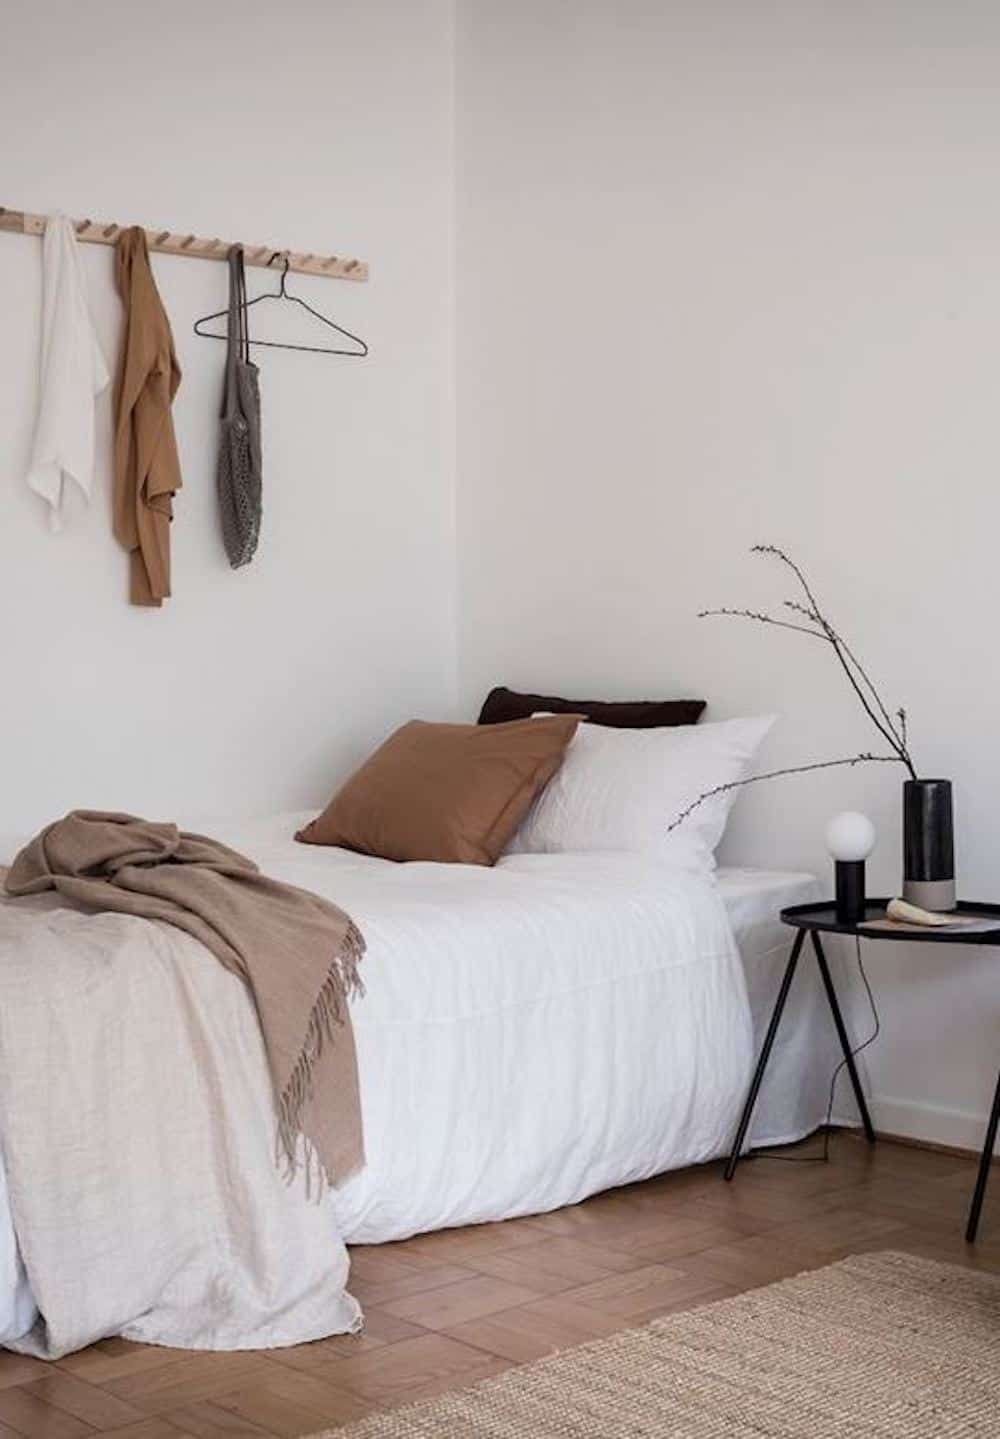 image of a small bed in a room with white sheets and neutral accents, and a wood peg board on the wall